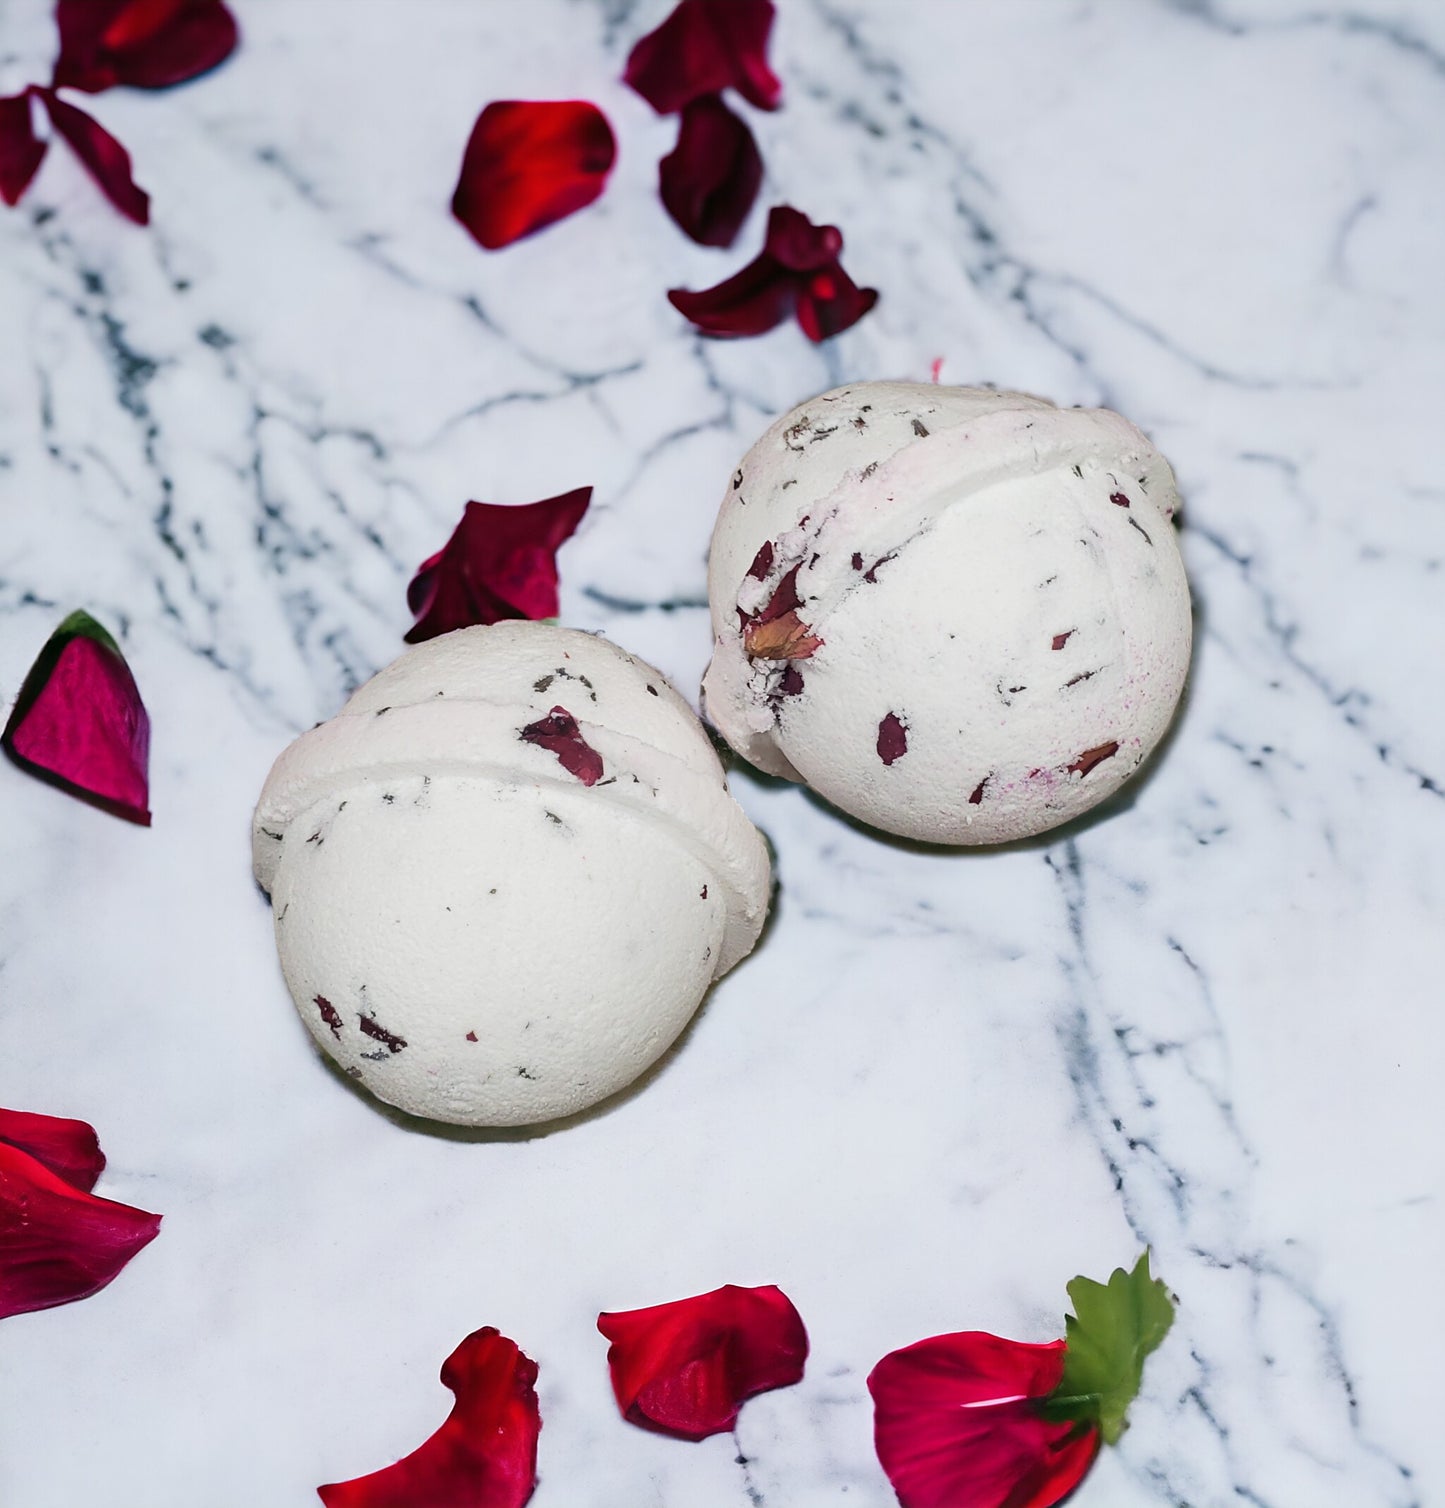 Rose and Lavender bubbly bath bomb